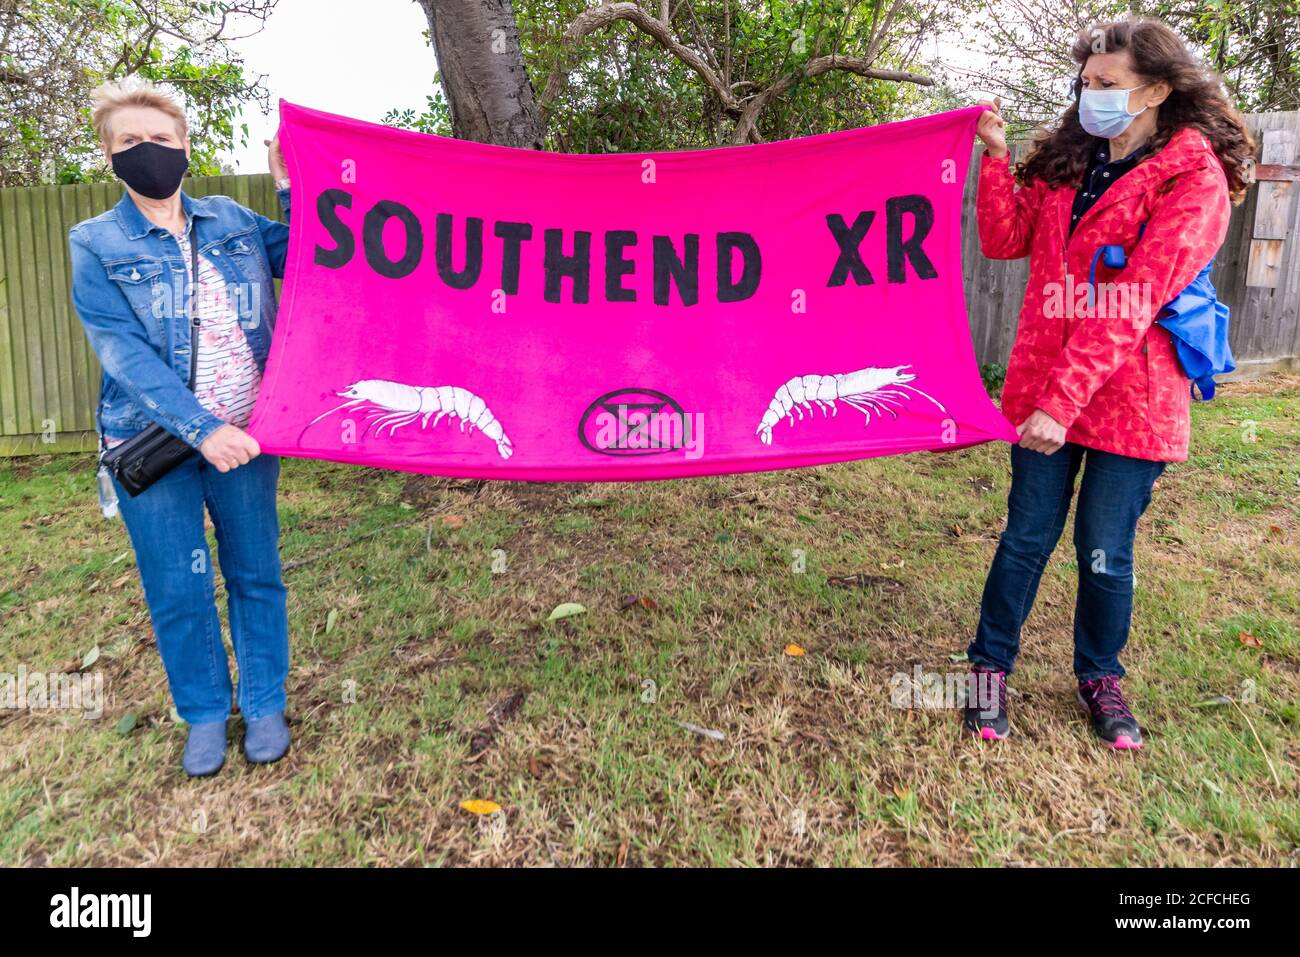 Extinction Rebellion Southend branch, XR, protesting at the airport against air travel. Two masked females holding banner with shrimp symbols Stock Photo